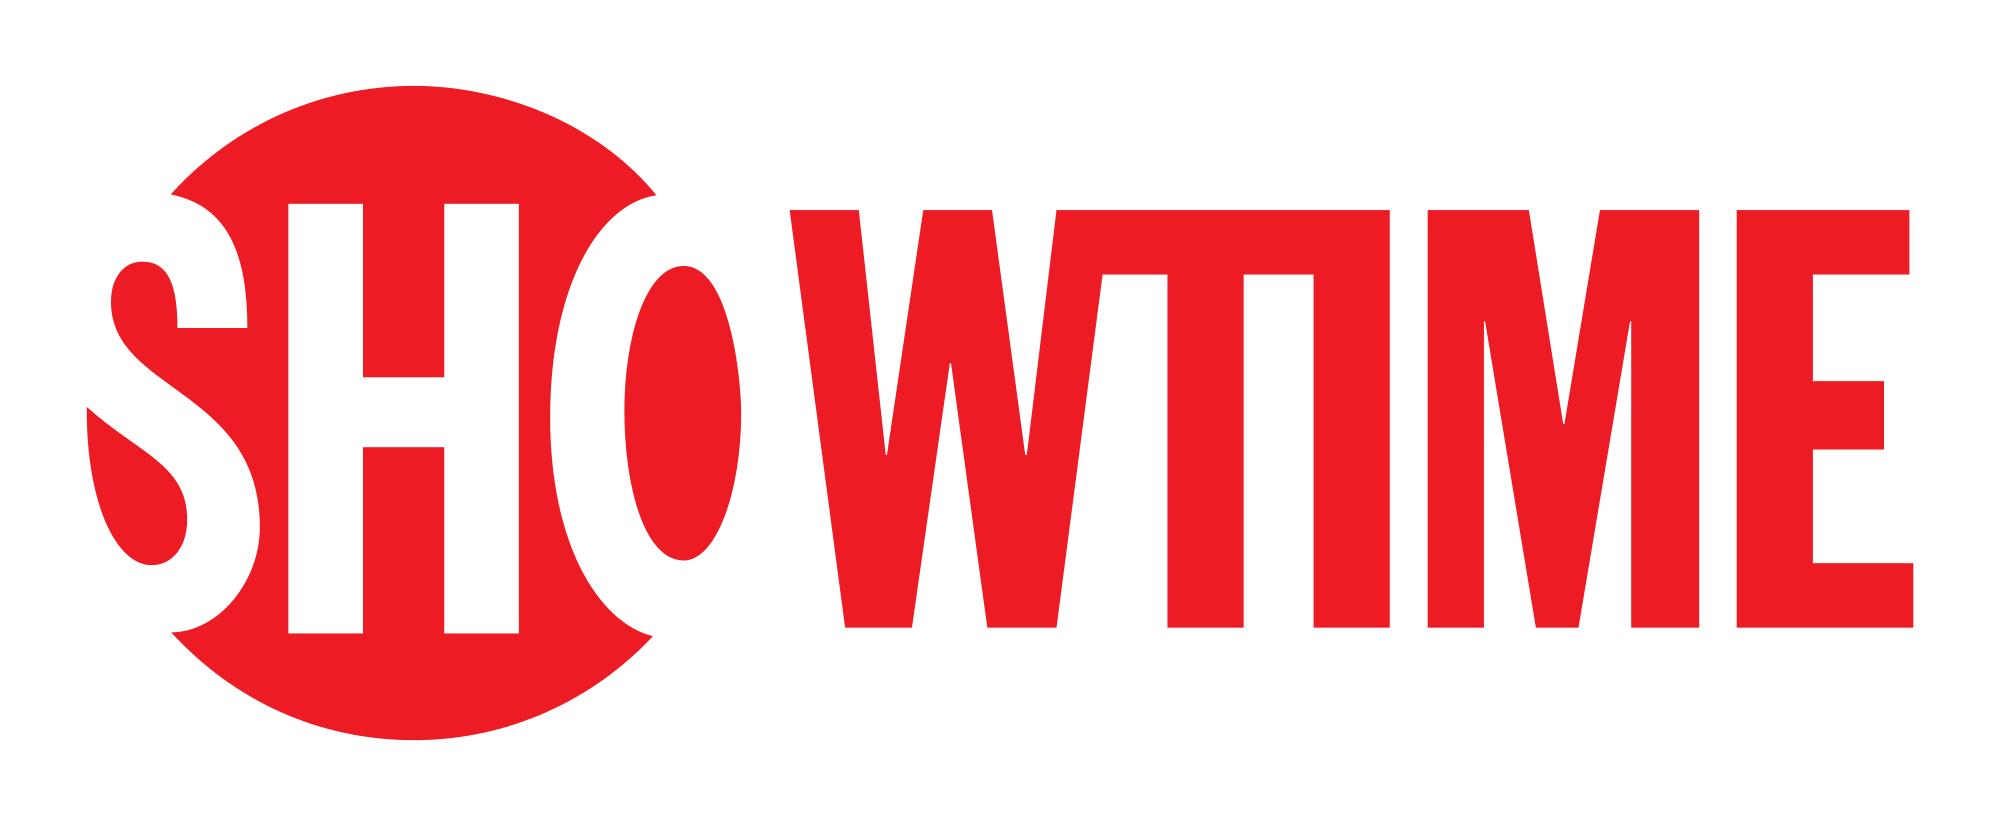 A_Showtime_logo_png.png